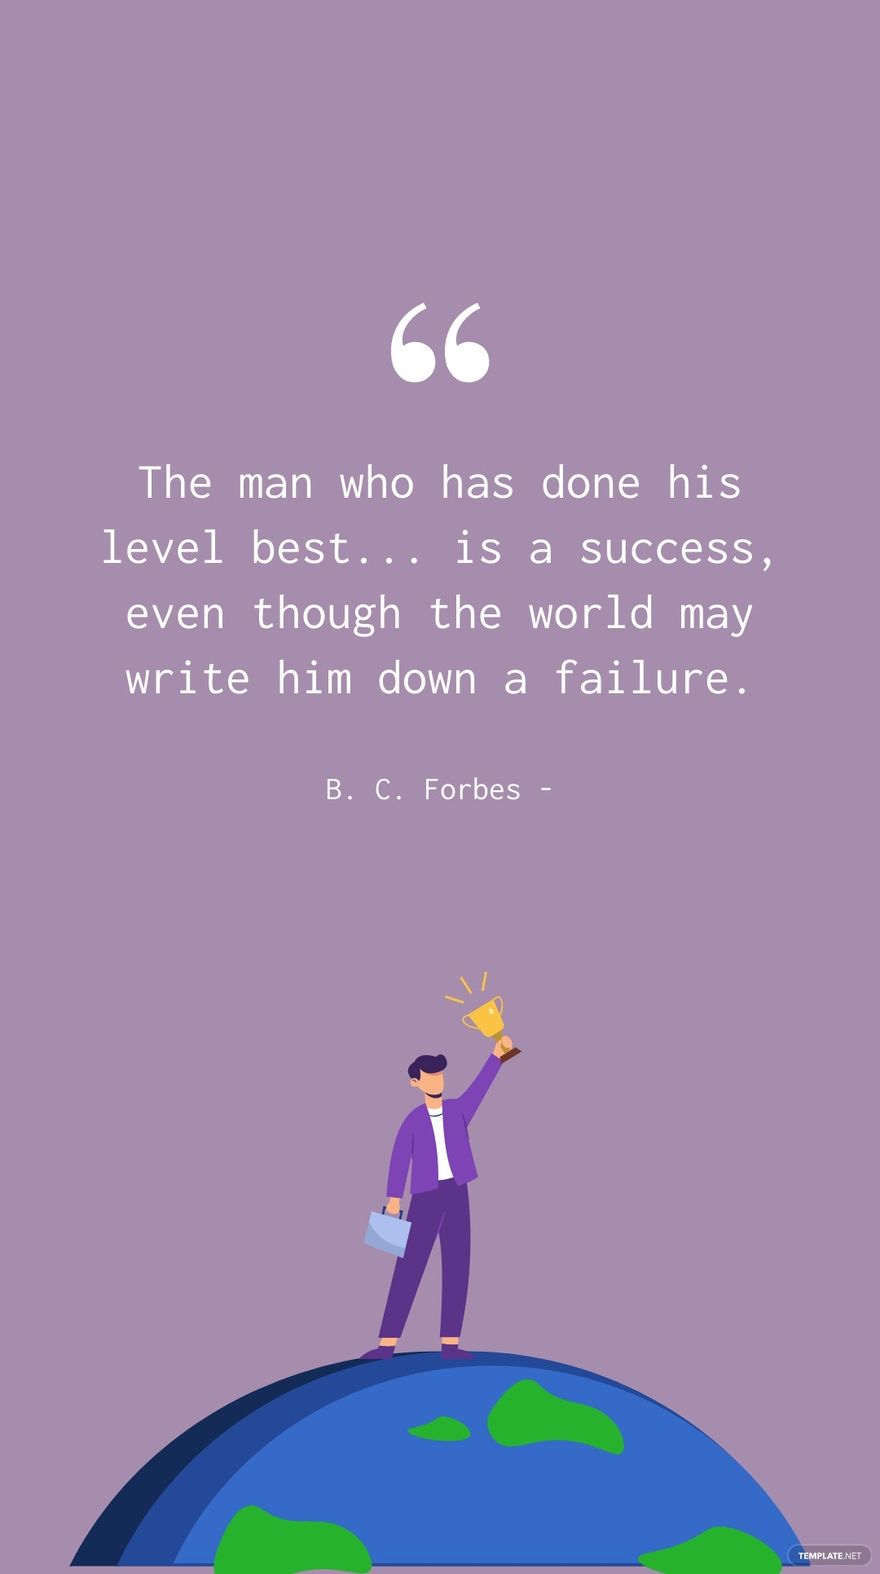 B. C. Forbes - The man who has done his level best... is a success, even though the world may write him down a failure.